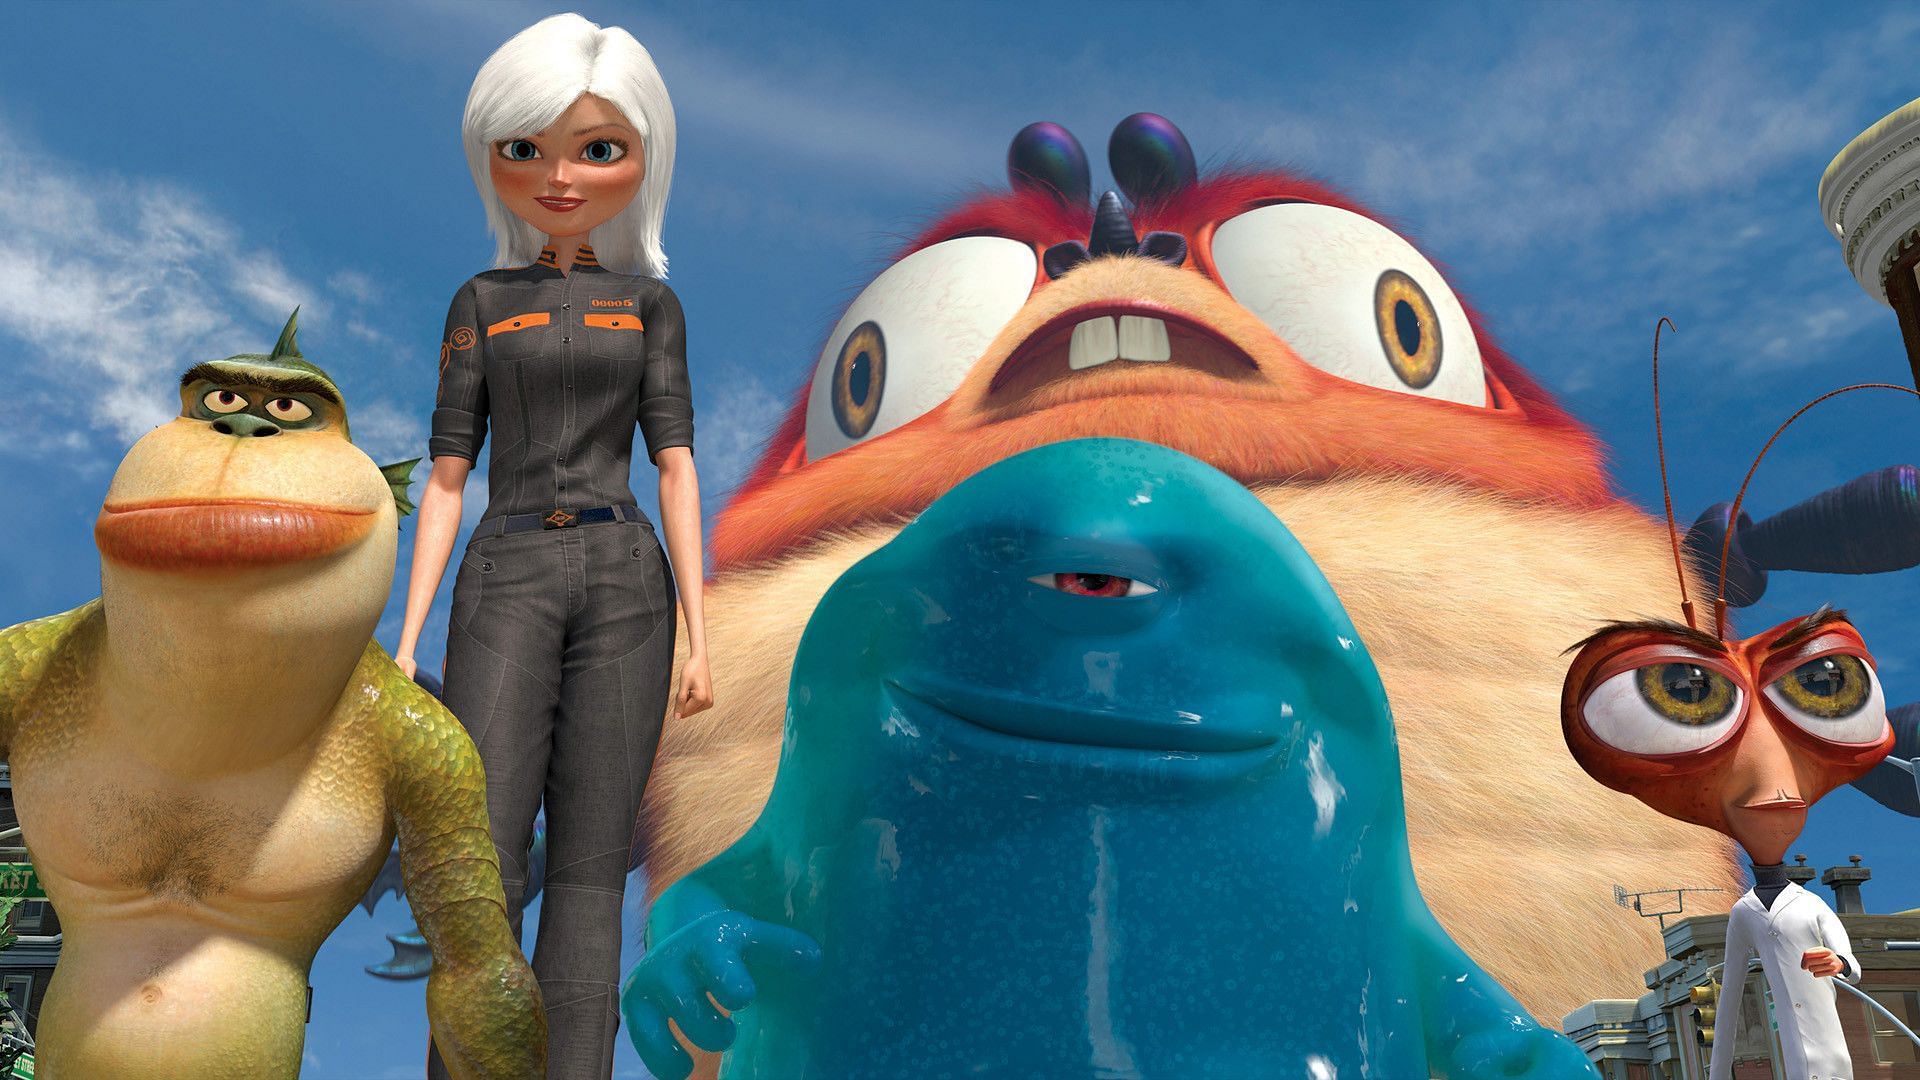 Dr. Cockroach and his monster compatriots in Monsters vs Aliens